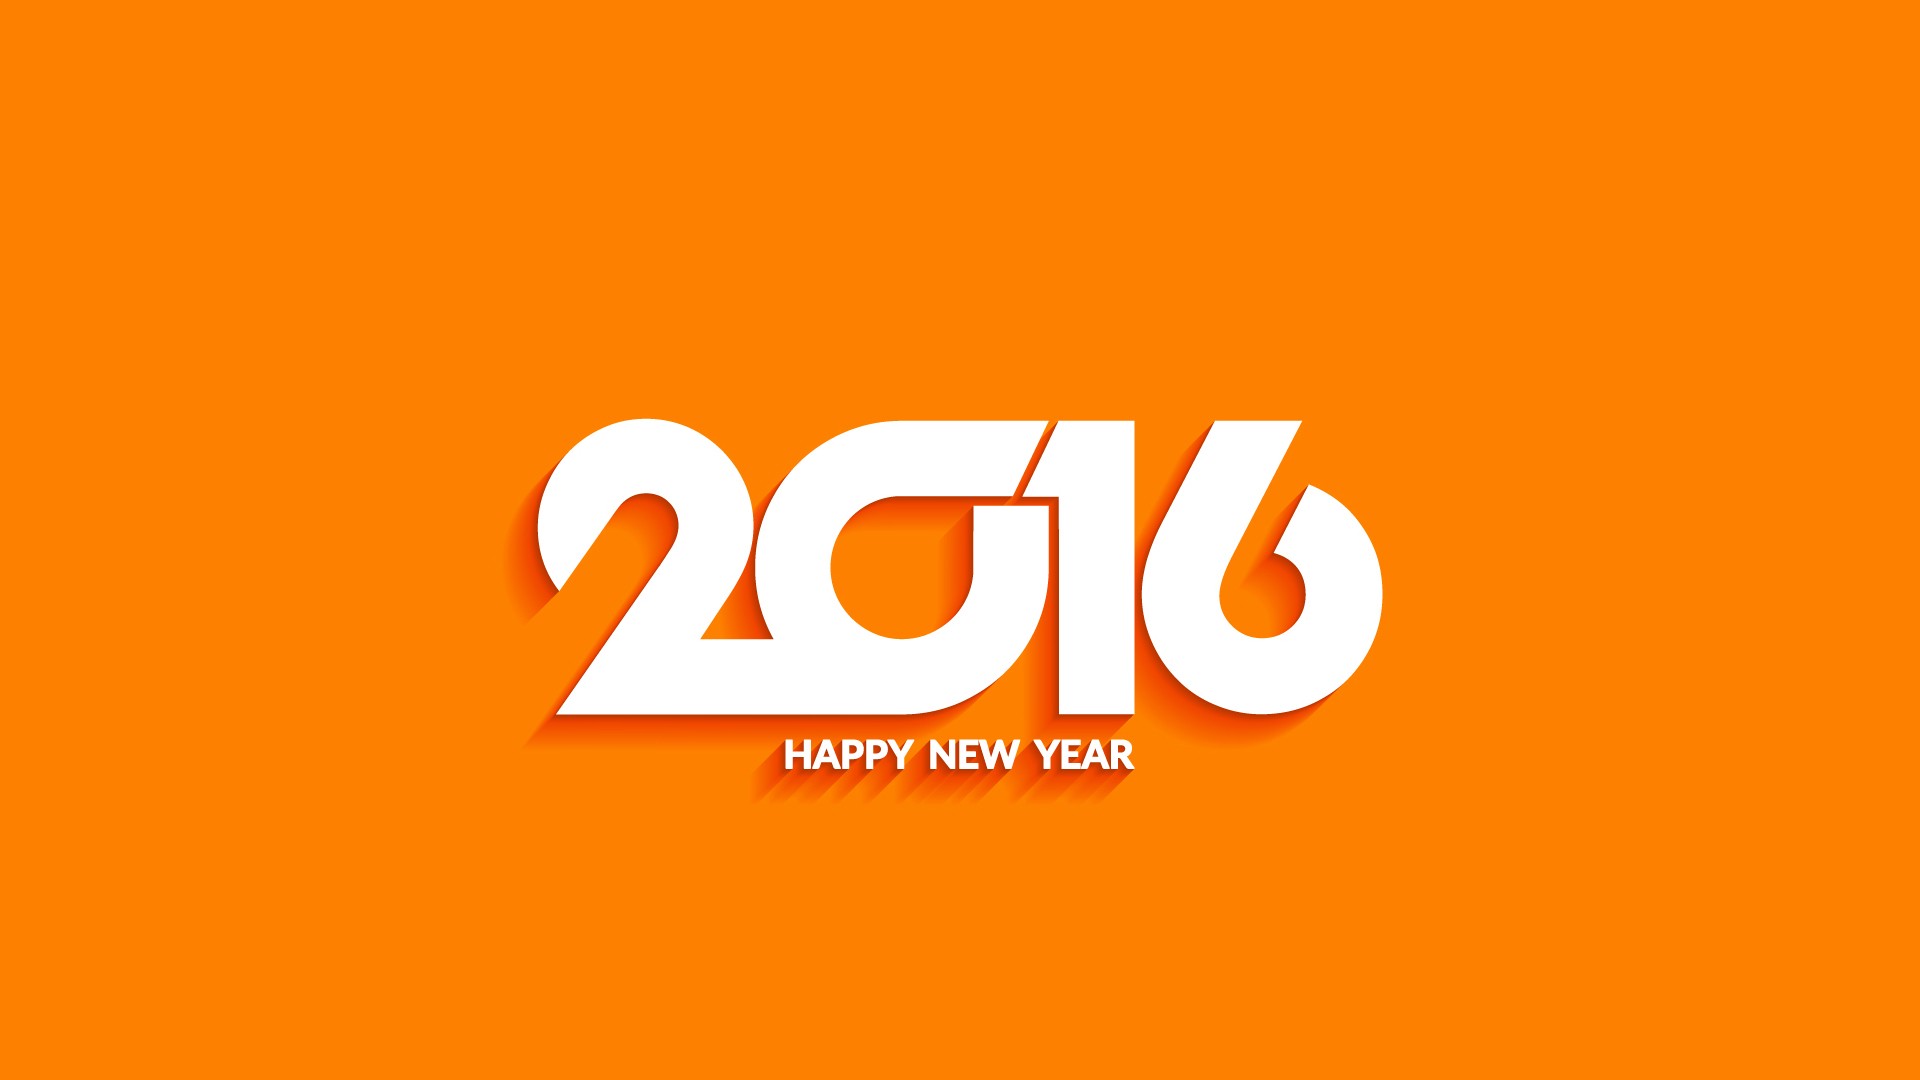 General 1920x1080 typography orange background quote New Year simple background 2016 (year) numbers